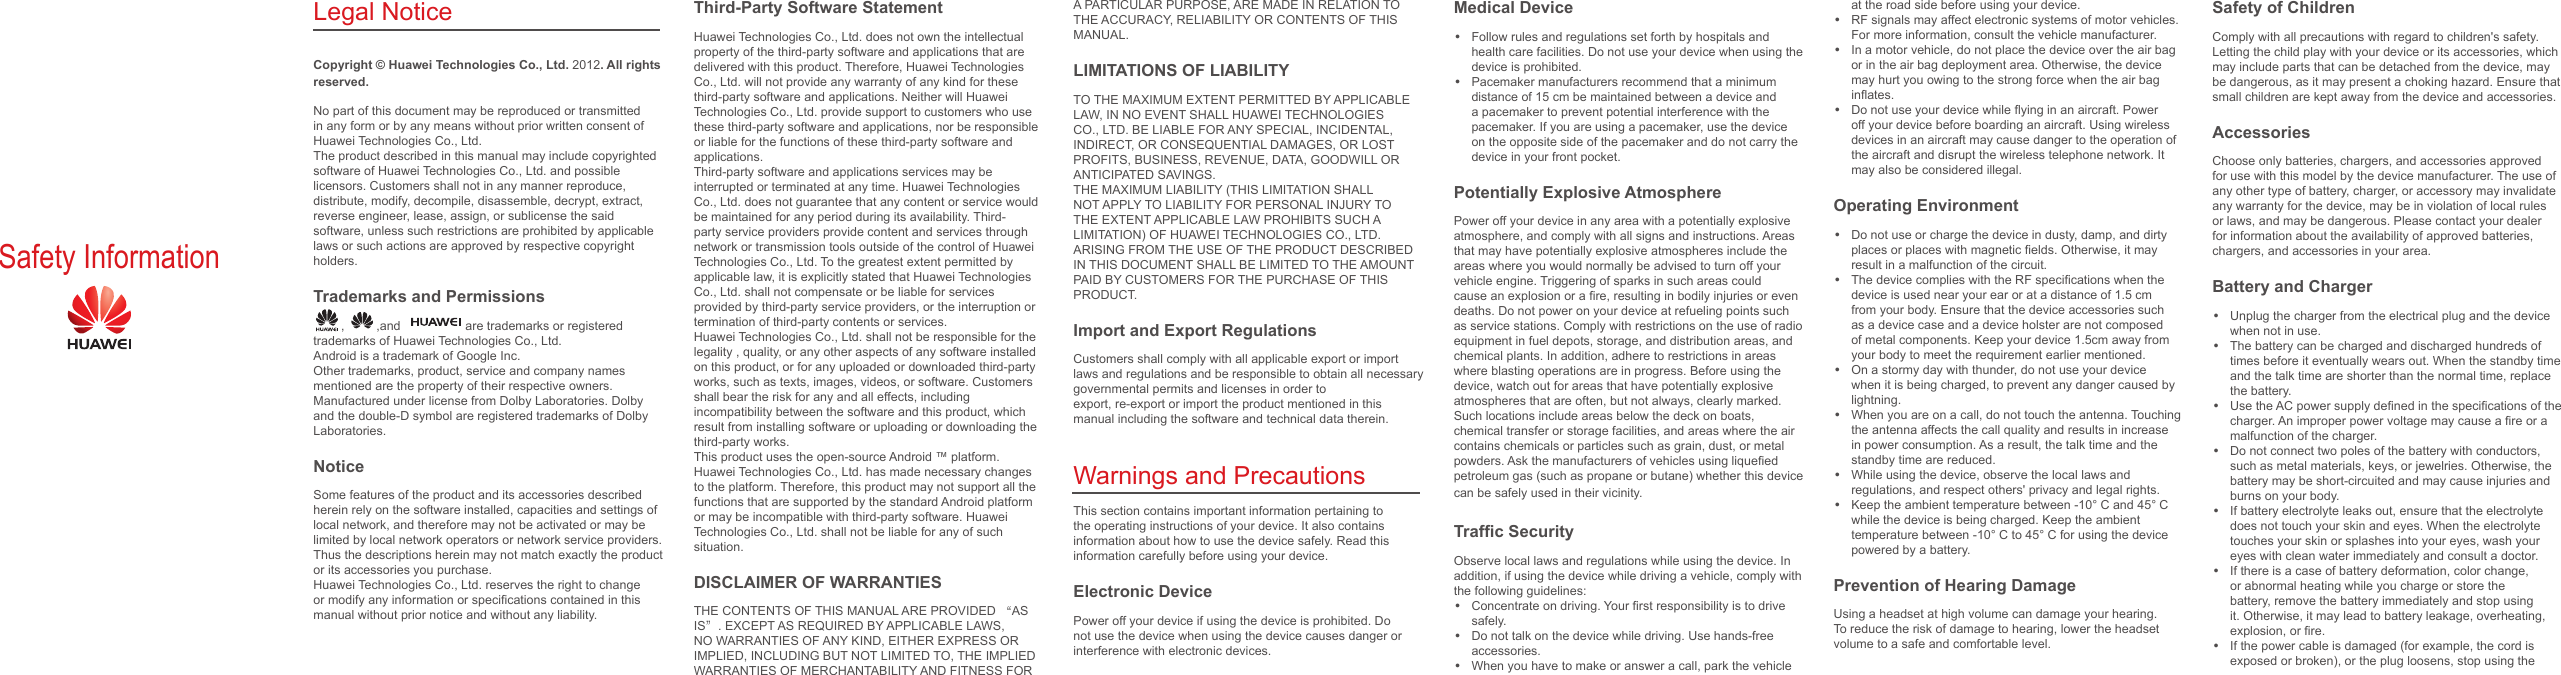 Safety InformationLegal NoticeCopyright © Huawei Technologies Co., Ltd. 2012. All rights reserved.No part of this document may be reproduced or transmitted in any form or by any means without prior written consent of Huawei Technologies Co., Ltd.The product described in this manual may include copyrighted software of Huawei Technologies Co., Ltd. and possible licensors. Customers shall not in any manner reproduce, distribute, modify, decompile, disassemble, decrypt, extract, reverse engineer, lease, assign, or sublicense the said software, unless such restrictions are prohibited by applicable laws or such actions are approved by respective copyright holders.Trademarks and Permissions,  ,and   are trademarks or registered trademarks of Huawei Technologies Co., Ltd.Android is a trademark of Google Inc.Other trademarks, product, service and company names mentioned are the property of their respective owners.Manufactured under license from Dolby Laboratories. Dolby and the double-D symbol are registered trademarks of Dolby Laboratories.NoticeSome features of the product and its accessories described herein rely on the software installed, capacities and settings of local network, and therefore may not be activated or may be limited by local network operators or network service providers.Thus the descriptions herein may not match exactly the product or its accessories you purchase.Huawei Technologies Co., Ltd. reserves the right to change or modify any information or speciﬁcations contained in this manual without prior notice and without any liability.Third-Party Software StatementHuawei Technologies Co., Ltd. does not own the intellectual property of the third-party software and applications that are delivered with this product. Therefore, Huawei Technologies Co., Ltd. will not provide any warranty of any kind for these third-party software and applications. Neither will Huawei Technologies Co., Ltd. provide support to customers who use these third-party software and applications, nor be responsibleor liable for the functions of these third-party software and applications.Third-party software and applications services may be interrupted or terminated at any time. Huawei Technologies Co., Ltd. does not guarantee that any content or service would be maintained for any period during its availability. Third-party service providers provide content and services through network or transmission tools outside of the control of Huawei Technologies Co., Ltd. To the greatest extent permitted byapplicable law, it is explicitly stated that Huawei Technologies Co., Ltd. shall not compensate or be liable for services provided by third-party service providers, or the interruption or termination of third-party contents or services.Huawei Technologies Co., Ltd. shall not be responsible for the legality , quality, or any other aspects of any software installed on this product, or for any uploaded or downloaded third-party works, such as texts, images, videos, or software. Customersshall bear the risk for any and all effects, including incompatibility between the software and this product, which result from installing software or uploading or downloading the third-party works.This product uses the open-source Android ™ platform. Huawei Technologies Co., Ltd. has made necessary changes to the platform. Therefore, this product may not support all the functions that are supported by the standard Android platform or may be incompatible with third-party software. Huawei Technologies Co., Ltd. shall not be liable for any of such situation.DISCLAIMER OF WARRANTIESTHE CONTENTS OF THIS MANUAL ARE PROVIDED “AS IS”. EXCEPT AS REQUIRED BY APPLICABLE LAWS, NO WARRANTIES OF ANY KIND, EITHER EXPRESS OR IMPLIED, INCLUDING BUT NOT LIMITED TO, THE IMPLIEDWARRANTIES OF MERCHANTABILITY AND FITNESS FOR A PARTICULAR PURPOSE, ARE MADE IN RELATION TO THE ACCURACY, RELIABILITY OR CONTENTS OF THIS MANUAL.LIMITATIONS OF LIABILITYTO THE MAXIMUM EXTENT PERMITTED BY APPLICABLE LAW, IN NO EVENT SHALL HUAWEI TECHNOLOGIES CO., LTD. BE LIABLE FOR ANY SPECIAL, INCIDENTAL, INDIRECT, OR CONSEQUENTIAL DAMAGES, OR LOSTPROFITS, BUSINESS, REVENUE, DATA, GOODWILL OR ANTICIPATED SAVINGS.THE MAXIMUM LIABILITY (THIS LIMITATION SHALL NOT APPLY TO LIABILITY FOR PERSONAL INJURY TO THE EXTENT APPLICABLE LAW PROHIBITS SUCH A LIMITATION) OF HUAWEI TECHNOLOGIES CO., LTD. ARISING FROM THE USE OF THE PRODUCT DESCRIBED IN THIS DOCUMENT SHALL BE LIMITED TO THE AMOUNT PAID BY CUSTOMERS FOR THE PURCHASE OF THIS PRODUCT.Import and Export RegulationsCustomers shall comply with all applicable export or import laws and regulations and be responsible to obtain all necessary governmental permits and licenses in order toexport, re-export or import the product mentioned in this manual including the software and technical data therein.Warnings and PrecautionsThis section contains important information pertaining to the operating instructions of your device. It also contains information about how to use the device safely. Read thisinformation carefully before using your device.Electronic DevicePower off your device if using the device is prohibited. Do not use the device when using the device causes danger or interference with electronic devices.Medical Device• Follow rules and regulations set forth by hospitals and health care facilities. Do not use your device when using the device is prohibited.• Pacemaker manufacturers recommend that a minimum distance of 15 cm be maintained between a device and a pacemaker to prevent potential interference with the pacemaker. If you are using a pacemaker, use the device on the opposite side of the pacemaker and do not carry the device in your front pocket.Potentially Explosive AtmospherePower off your device in any area with a potentially explosive atmosphere, and comply with all signs and instructions. Areas that may have potentially explosive atmospheres include the areas where you would normally be advised to turn off yourvehicle engine. Triggering of sparks in such areas could cause an explosion or a ﬁre, resulting in bodily injuries or even deaths. Do not power on your device at refueling points such as service stations. Comply with restrictions on the use of radio equipment in fuel depots, storage, and distribution areas, and chemical plants. In addition, adhere to restrictions in areas where blasting operations are in progress. Before using thedevice, watch out for areas that have potentially explosive atmospheres that are often, but not always, clearly marked. Such locations include areas below the deck on boats, chemical transfer or storage facilities, and areas where the air contains chemicals or particles such as grain, dust, or metal powders. Ask the manufacturers of vehicles using liqueﬁed petroleum gas (such as propane or butane) whether this device can be safely used in their vicinity.Trafﬁc SecurityObserve local laws and regulations while using the device. In addition, if using the device while driving a vehicle, comply with the following guidelines:• Concentrate on driving. Your ﬁrst responsibility is to drive safely.• Do not talk on the device while driving. Use hands-free accessories.• When you have to make or answer a call, park the vehicle at the road side before using your device.• RF signals may affect electronic systems of motor vehicles. For more information, consult the vehicle manufacturer.• In a motor vehicle, do not place the device over the air bag or in the air bag deployment area. Otherwise, the device may hurt you owing to the strong force when the air bag inﬂates.• Do not use your device while ﬂying in an aircraft. Power off your device before boarding an aircraft. Using wireless devices in an aircraft may cause danger to the operation of the aircraft and disrupt the wireless telephone network. It may also be considered illegal.Operating Environment• Do not use or charge the device in dusty, damp, and dirty places or places with magnetic ﬁelds. Otherwise, it may result in a malfunction of the circuit.• The device complies with the RF speciﬁcations when the device is used near your ear or at a distance of 1.5 cm from your body. Ensure that the device accessories such as a device case and a device holster are not composed of metal components. Keep your device 1.5cm away from your body to meet the requirement earlier mentioned.• On a stormy day with thunder, do not use your device when it is being charged, to prevent any danger caused by lightning.• When you are on a call, do not touch the antenna. Touching the antenna affects the call quality and results in increase in power consumption. As a result, the talk time and the standby time are reduced.• While using the device, observe the local laws and regulations, and respect others&apos; privacy and legal rights.• Keep the ambient temperature between -10°C and 45°C while the device is being charged. Keep the ambient temperature between -10°C to 45°C for using the device powered by a battery.Prevention of Hearing DamageUsing a headset at high volume can damage your hearing. To reduce the risk of damage to hearing, lower the headset volume to a safe and comfortable level.Safety of ChildrenComply with all precautions with regard to children&apos;s safety. Letting the child play with your device or its accessories, which may include parts that can be detached from the device, may be dangerous, as it may present a choking hazard. Ensure that small children are kept away from the device and accessories.AccessoriesChoose only batteries, chargers, and accessories approved for use with this model by the device manufacturer. The use of any other type of battery, charger, or accessory may invalidate any warranty for the device, may be in violation of local rules or laws, and may be dangerous. Please contact your dealer for information about the availability of approved batteries, chargers, and accessories in your area.Battery and Charger• Unplug the charger from the electrical plug and the device when not in use.• The battery can be charged and discharged hundreds of times before it eventually wears out. When the standby time and the talk time are shorter than the normal time, replace the battery.• Use the AC power supply deﬁned in the speciﬁcations of the charger. An improper power voltage may cause a ﬁre or a malfunction of the charger.• Do not connect two poles of the battery with conductors, such as metal materials, keys, or jewelries. Otherwise, the battery may be short-circuited and may cause injuries and burns on your body.• If battery electrolyte leaks out, ensure that the electrolyte does not touch your skin and eyes. When the electrolyte touches your skin or splashes into your eyes, wash your eyes with clean water immediately and consult a doctor.• If there is a case of battery deformation, color change, or abnormal heating while you charge or store the battery, remove the battery immediately and stop using it. Otherwise, it may lead to battery leakage, overheating, explosion, or ﬁre.• If the power cable is damaged (for example, the cord is exposed or broken), or the plug loosens, stop using the 